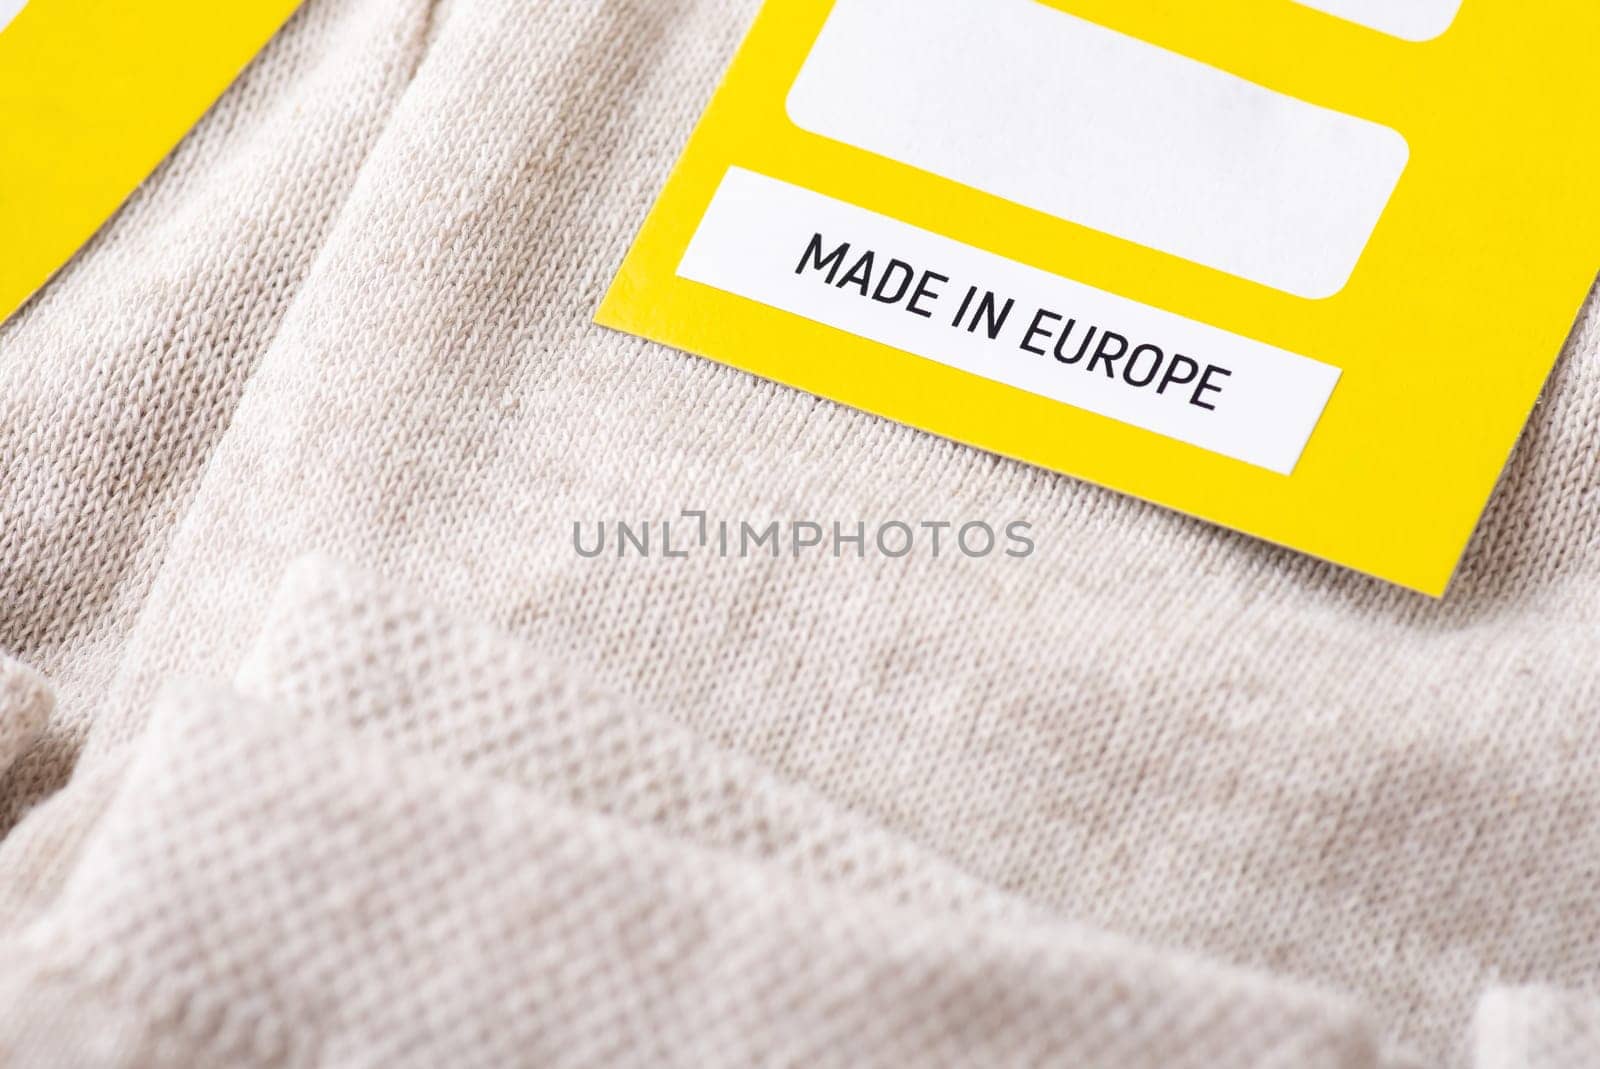 Making clothes in Europe concept